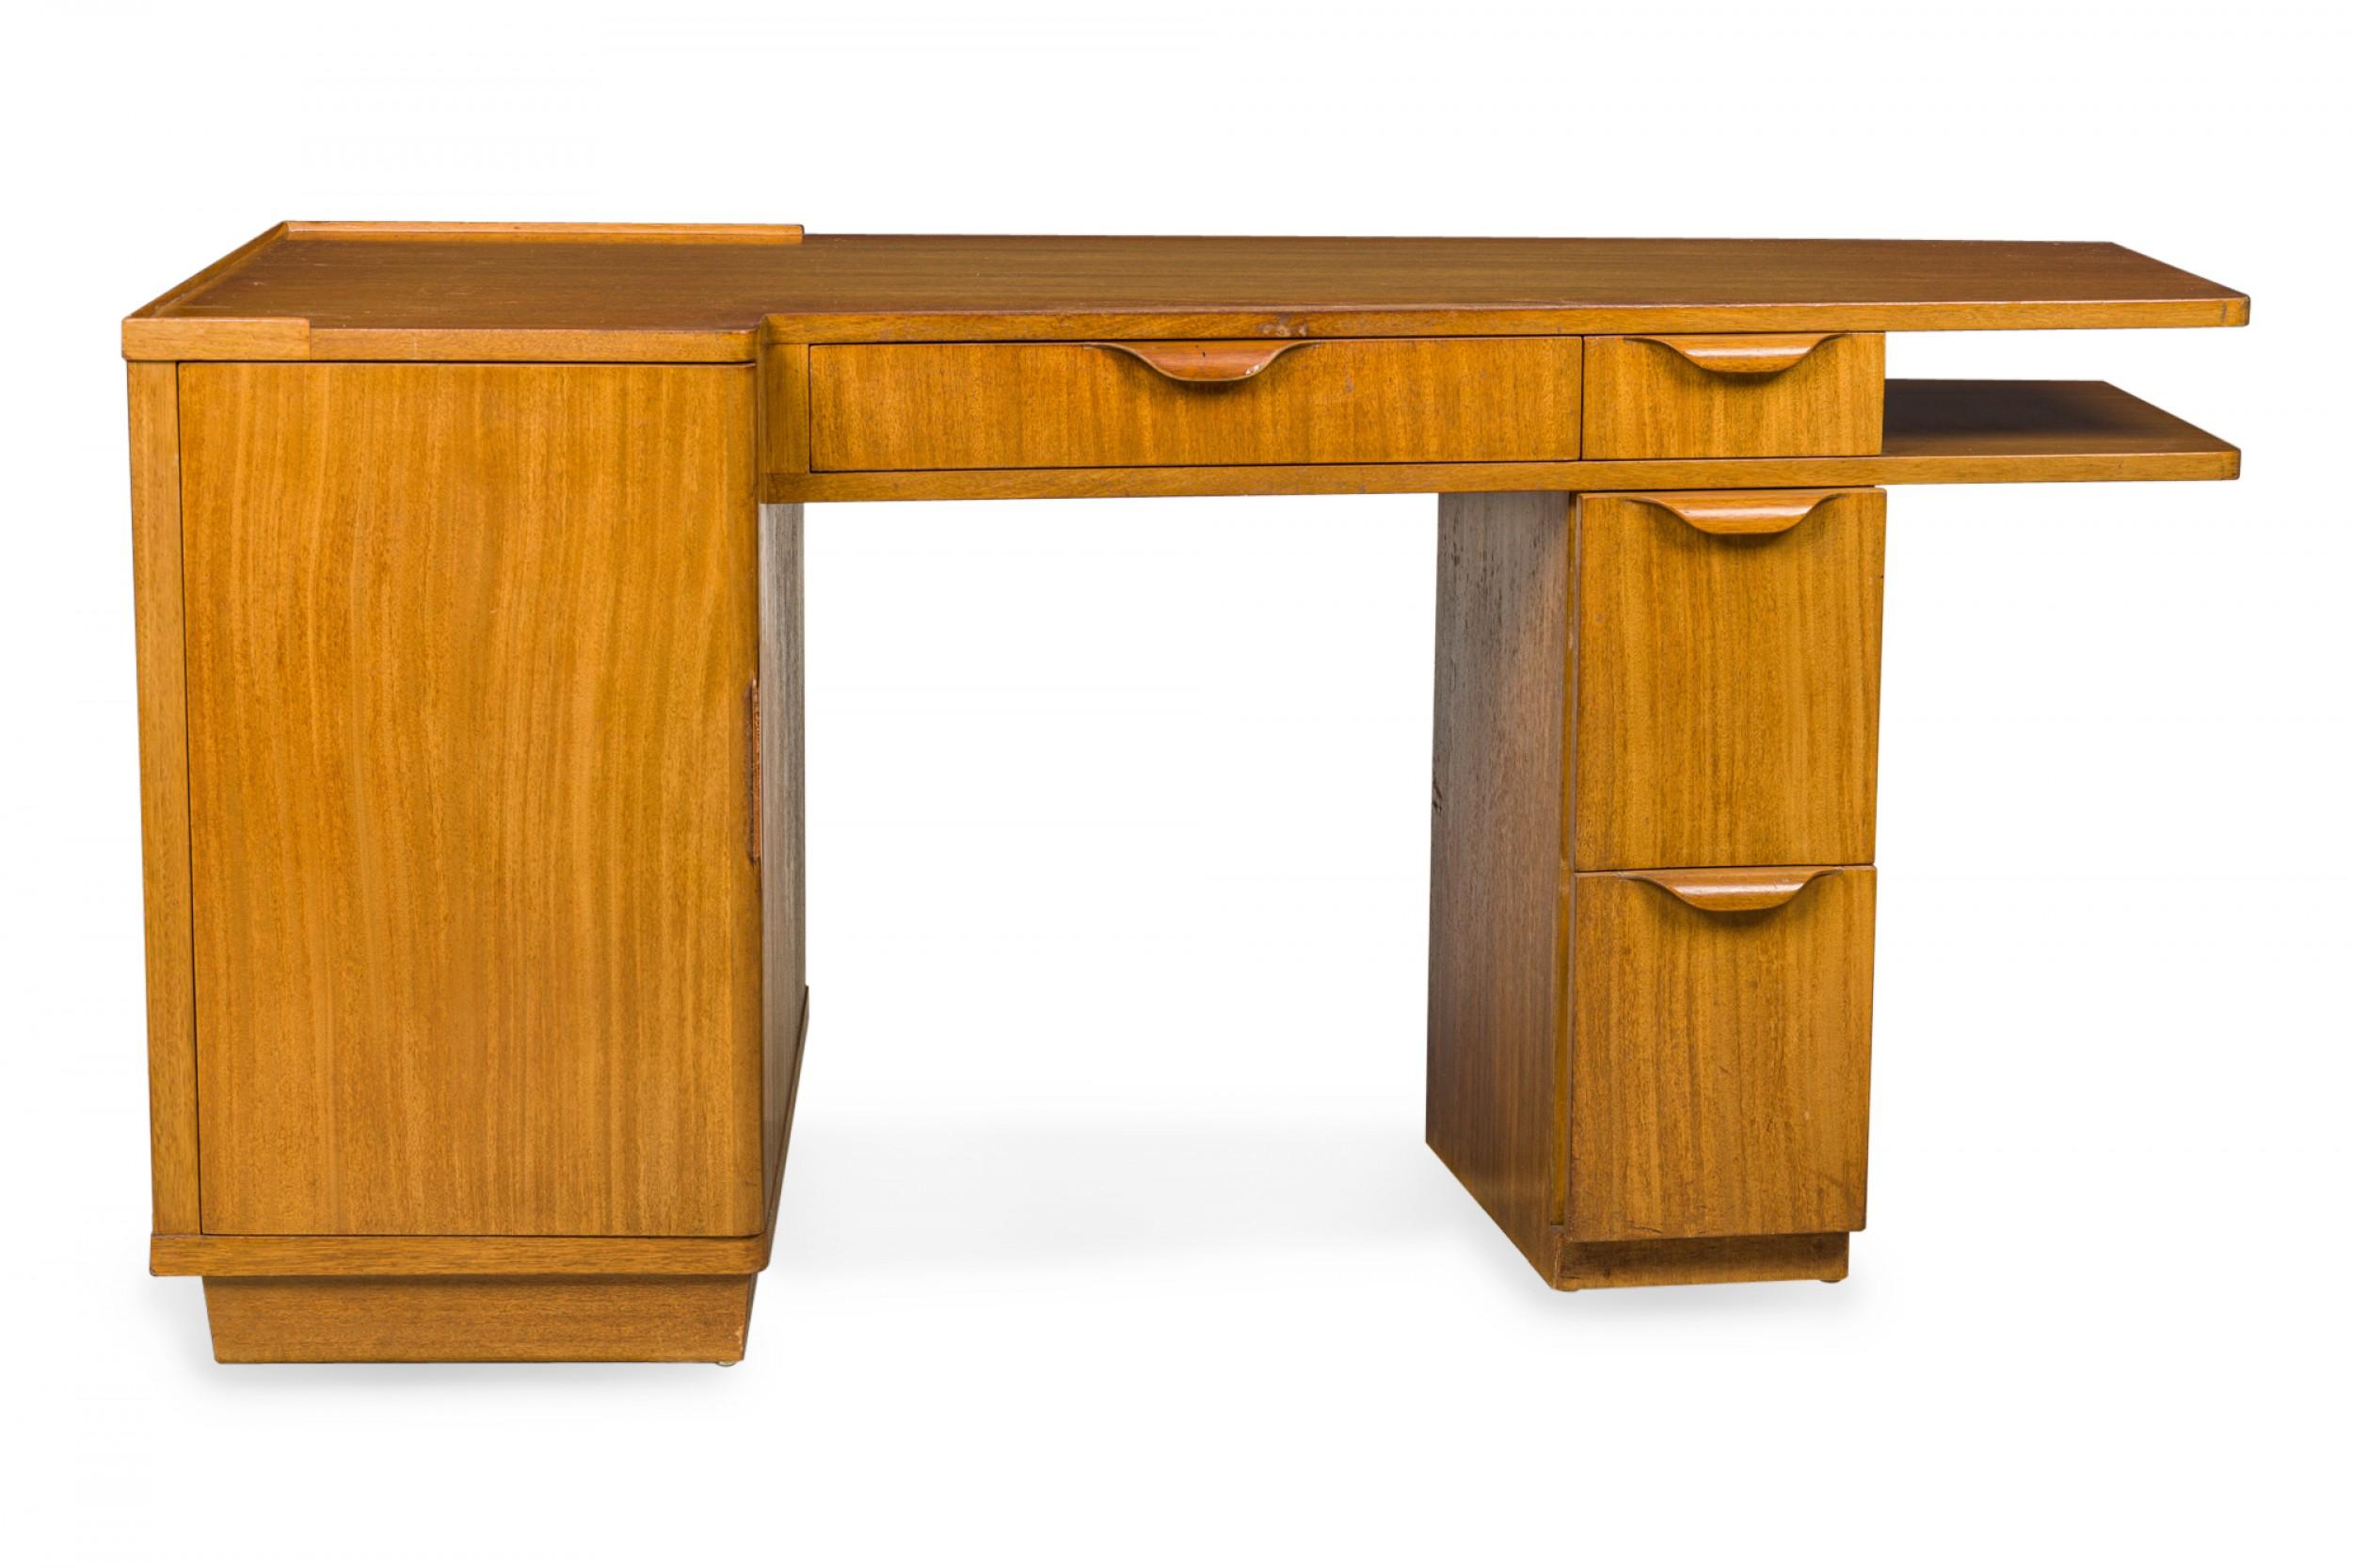 American mid-century wooden pedestal desk with four drawers with wooden drawer pulls, a shelf on the right-hand side below the tabletop, and a cabinet to the left with an extendable writing surface concealed within. (EDWARD J WORMLEY FOR DUNBAR